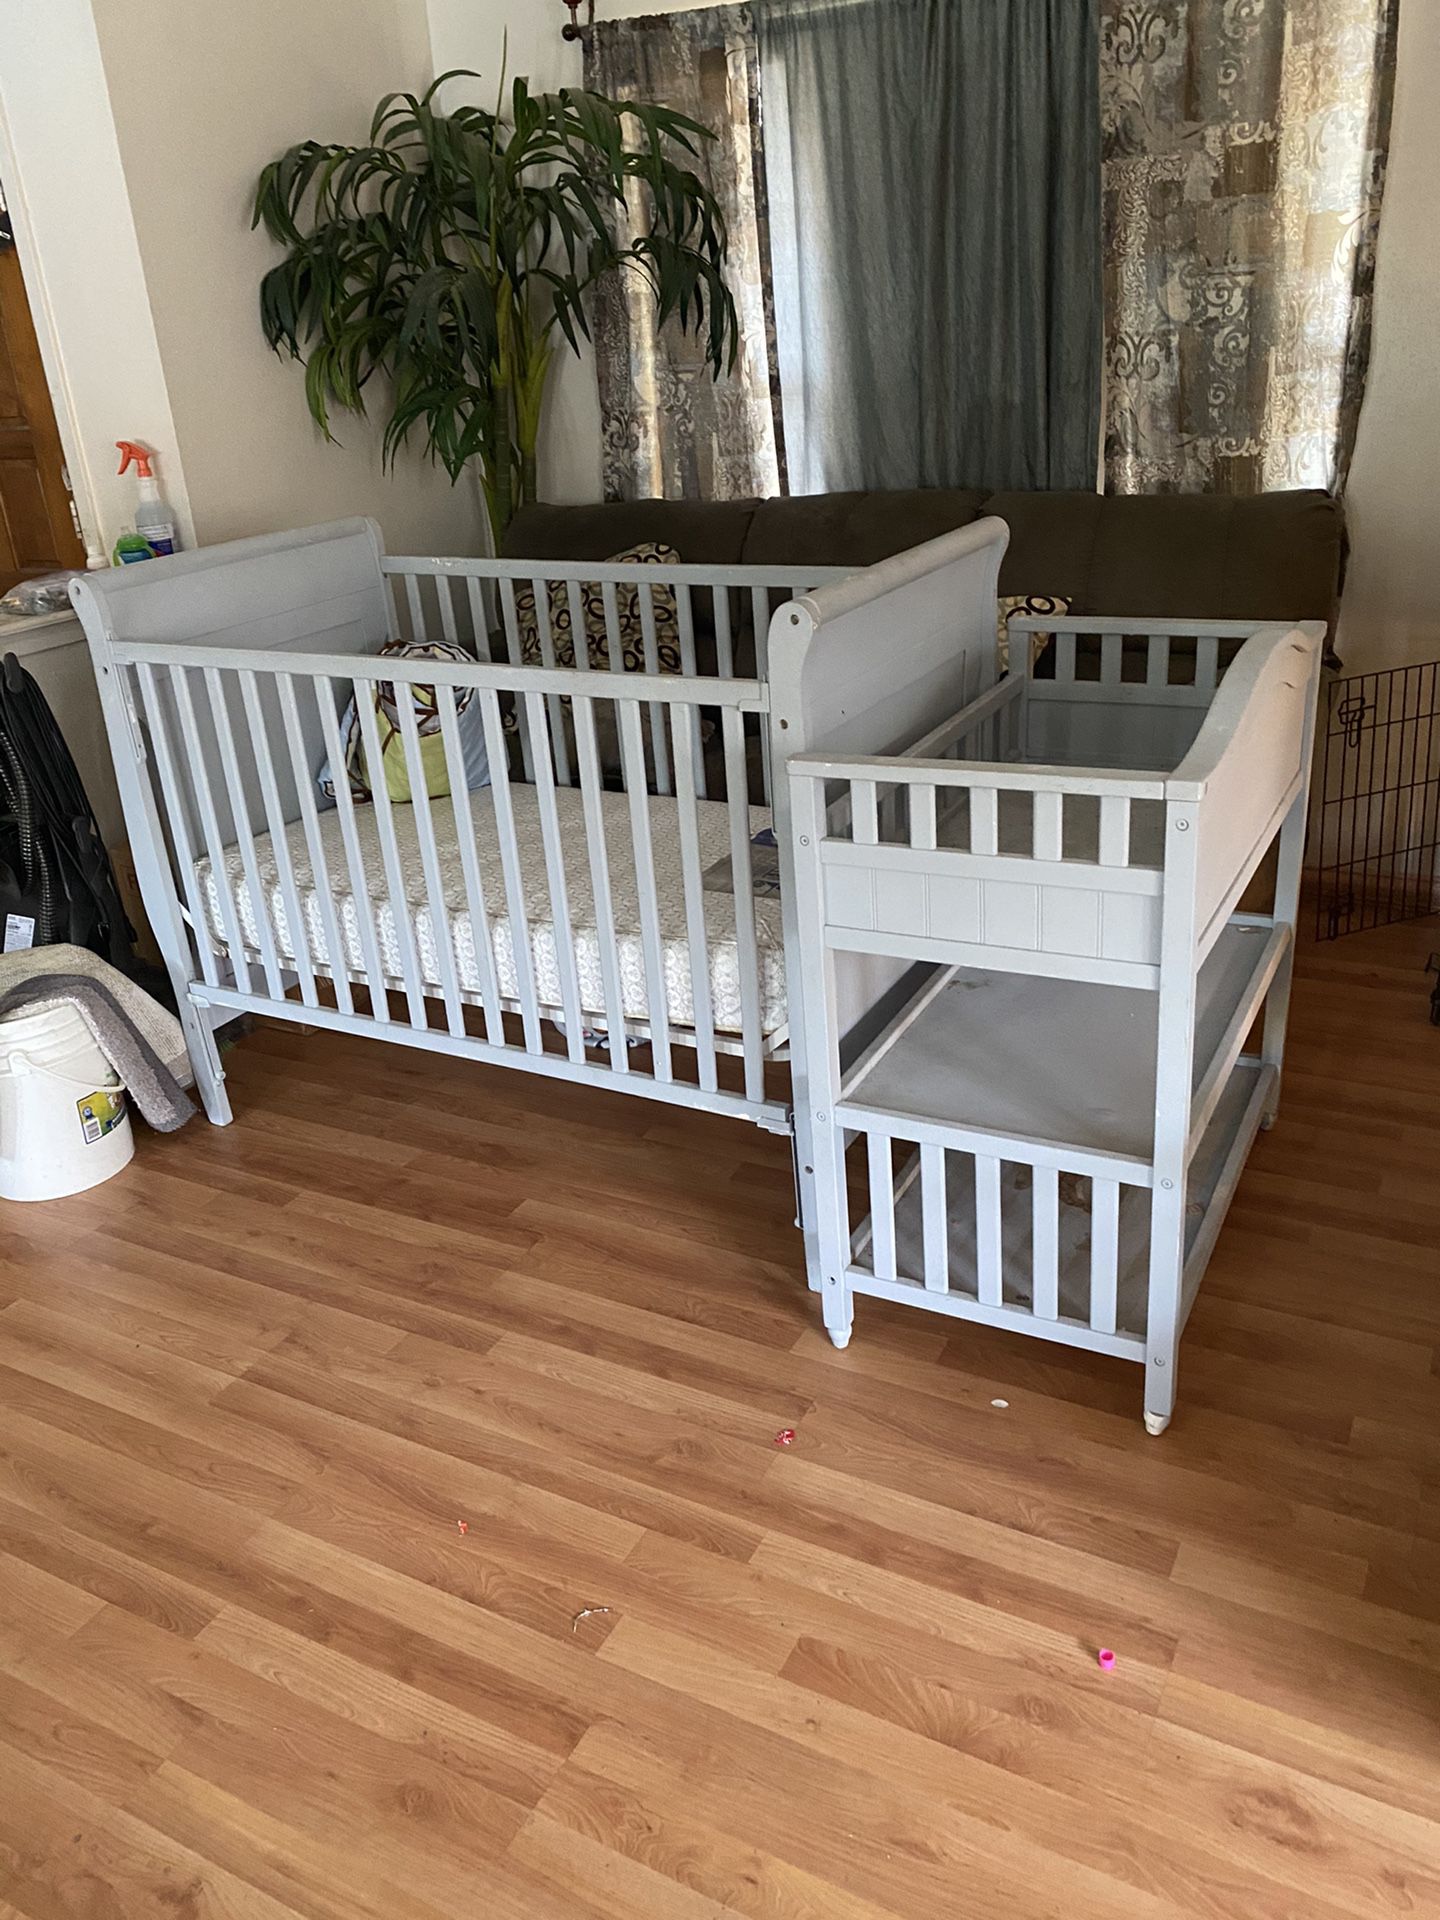 Crib changing table and mattress